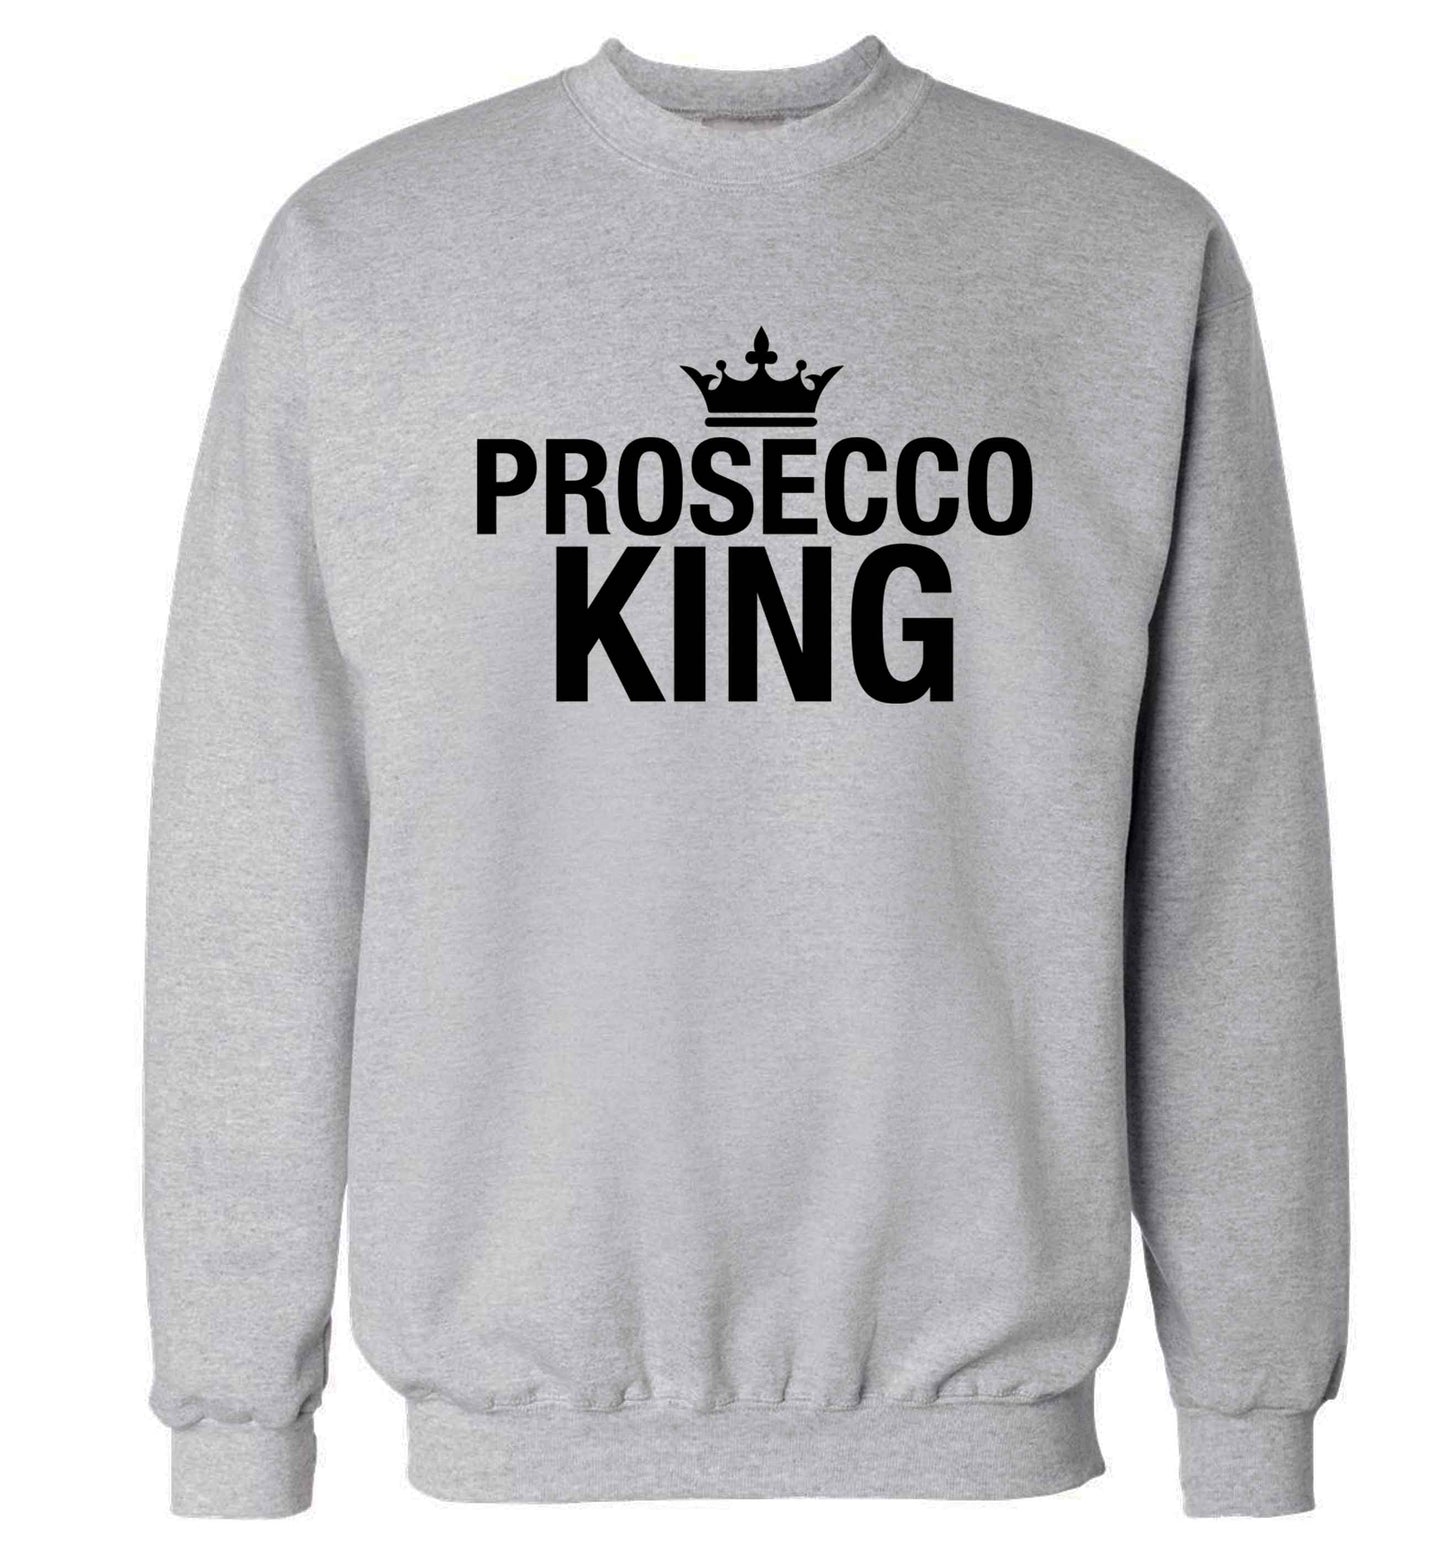 Prosecco king Adult's unisex grey Sweater 2XL